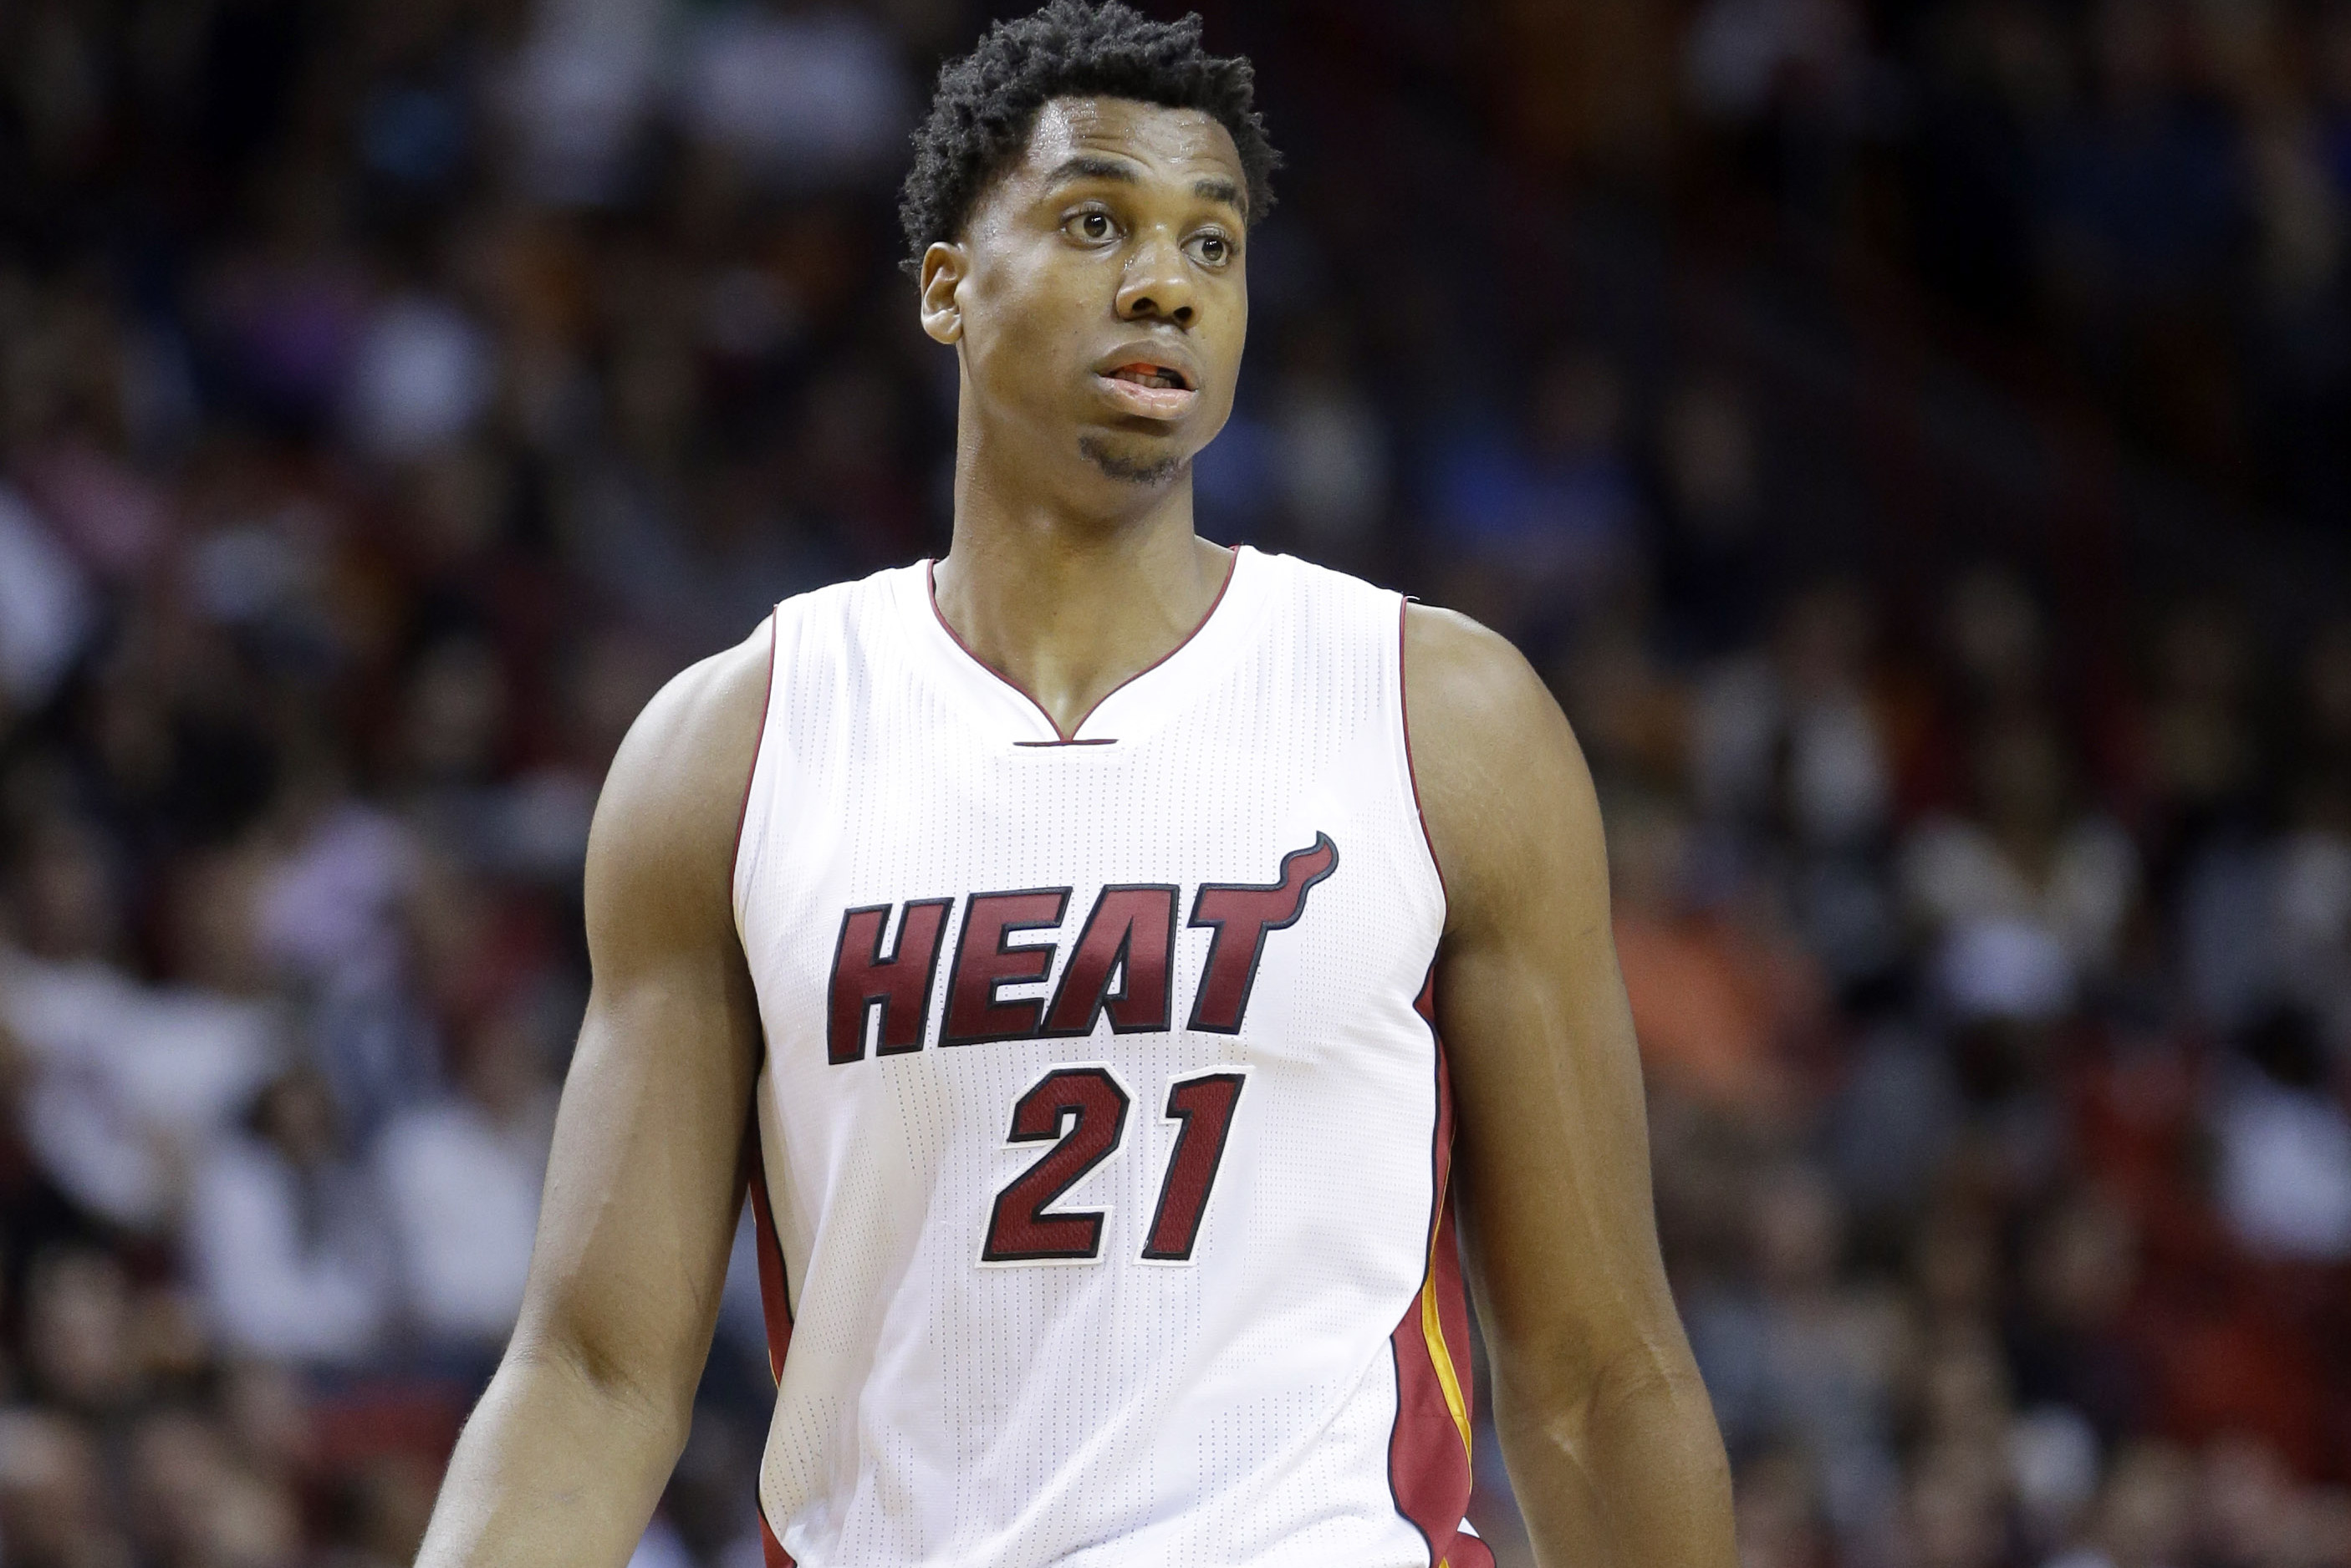 NBA Buzz - BREAKING: Hassan Whiteside has signed with the